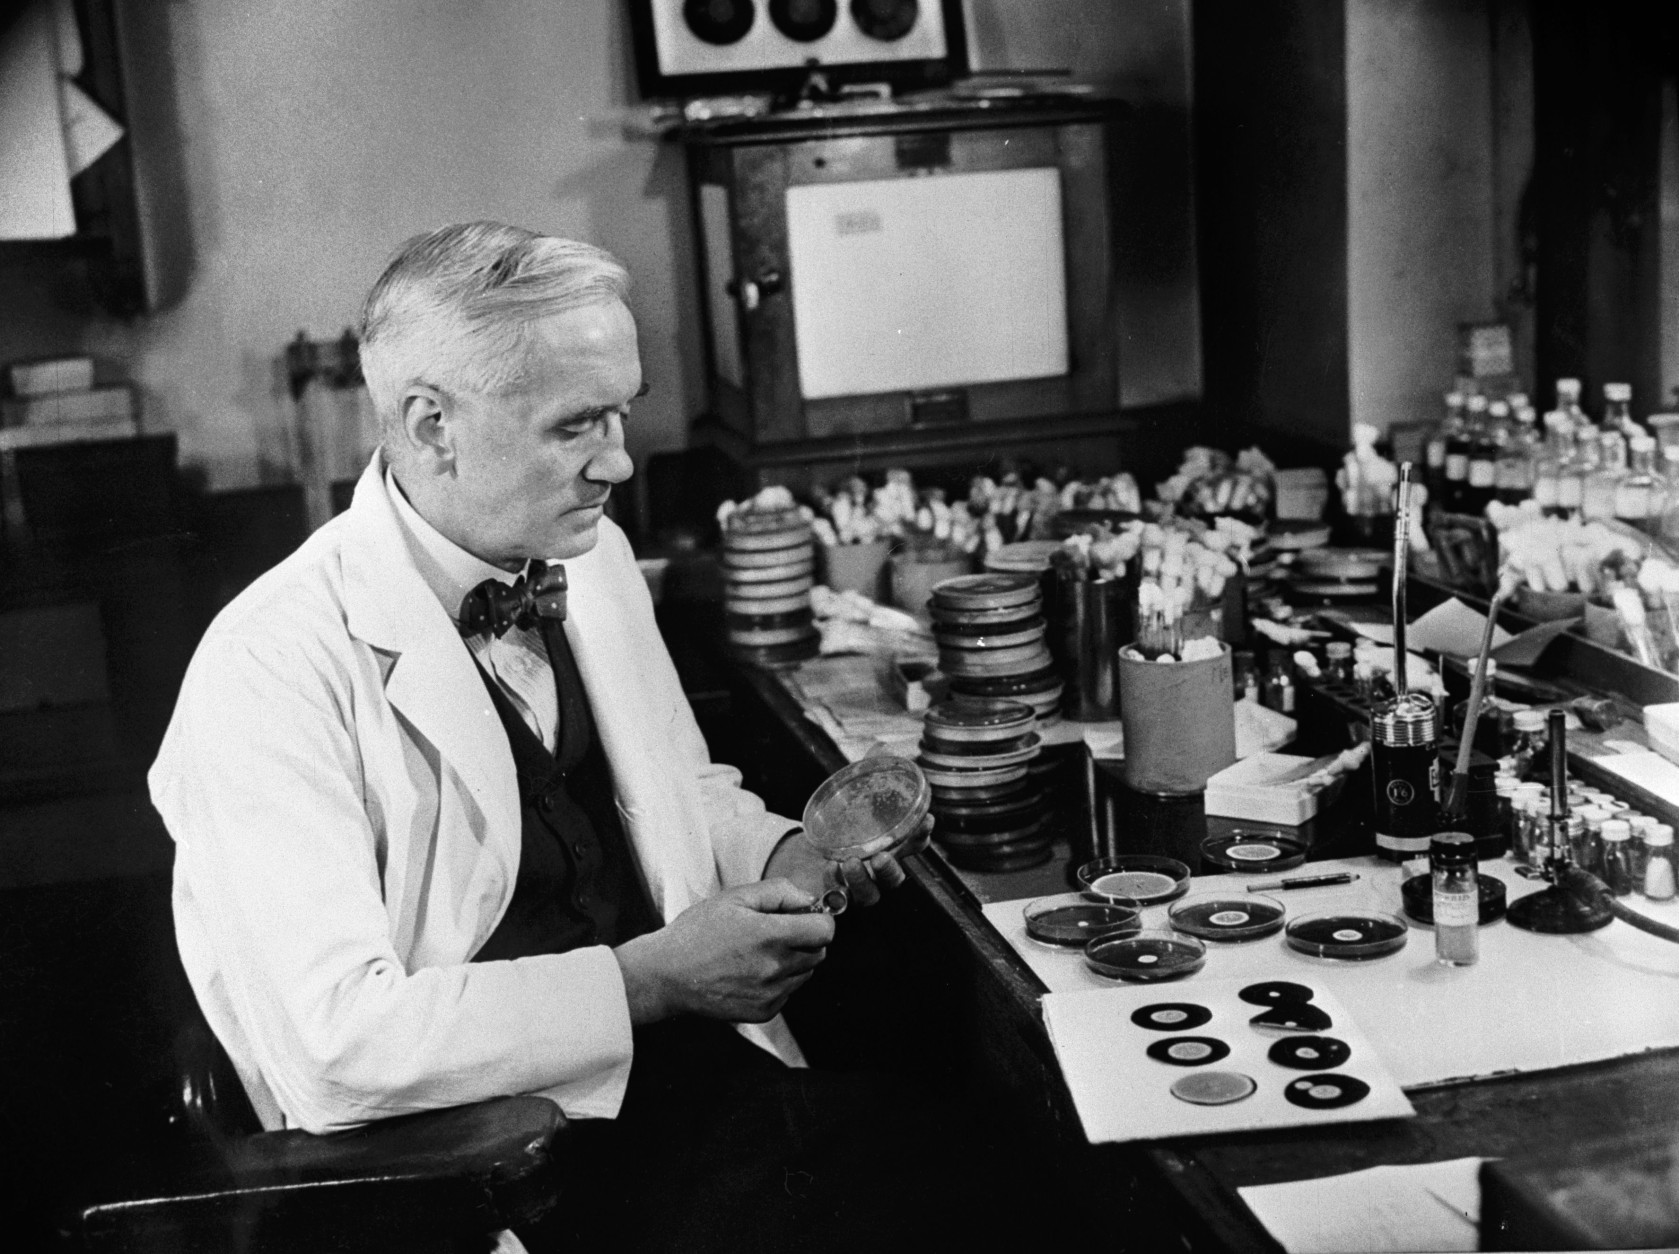 1955:  Sir Alexander Fleming (1881 - 1955), discoverer of penicillin, studies mould cultures in his laboratory at the Wright Fleming Institute in London. Fleming also developed a technique of 'painting' pictures with germs, drawing outlines on small pieces of paper, which would grow into a picture as the microbes multiplied.  (Photo by Peter Purdy/BIPs/Getty Images)